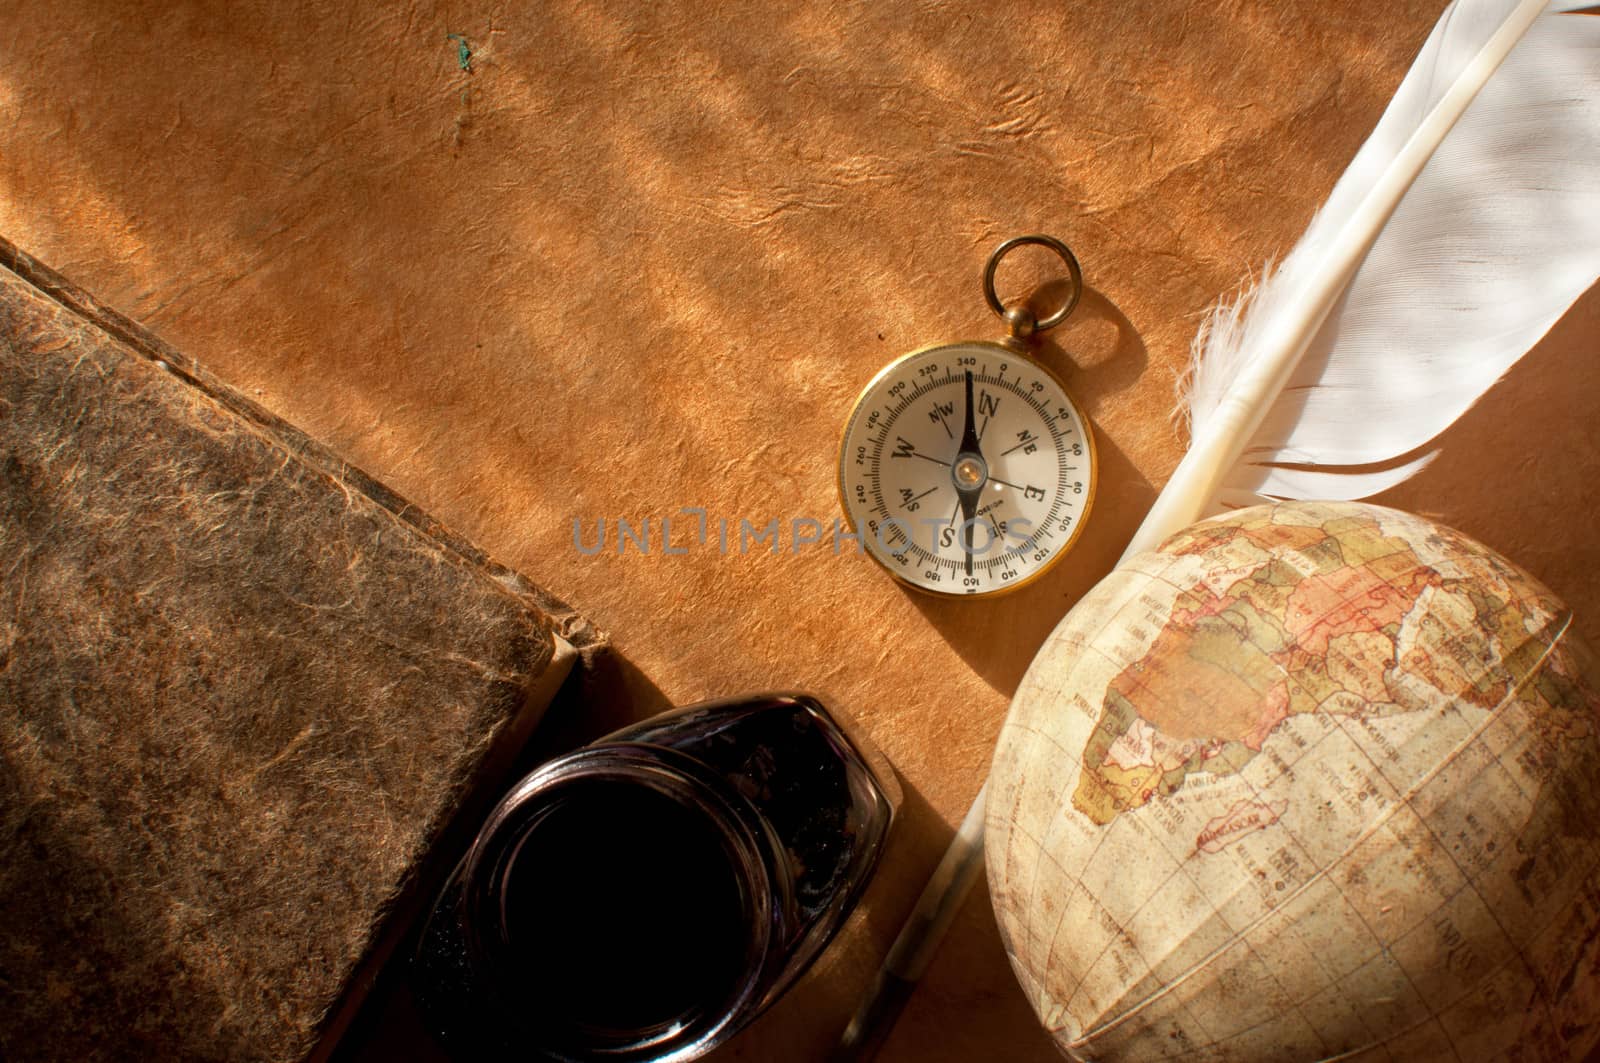 Still life background consisting of vintage objects including a quill and compass on an old paper background